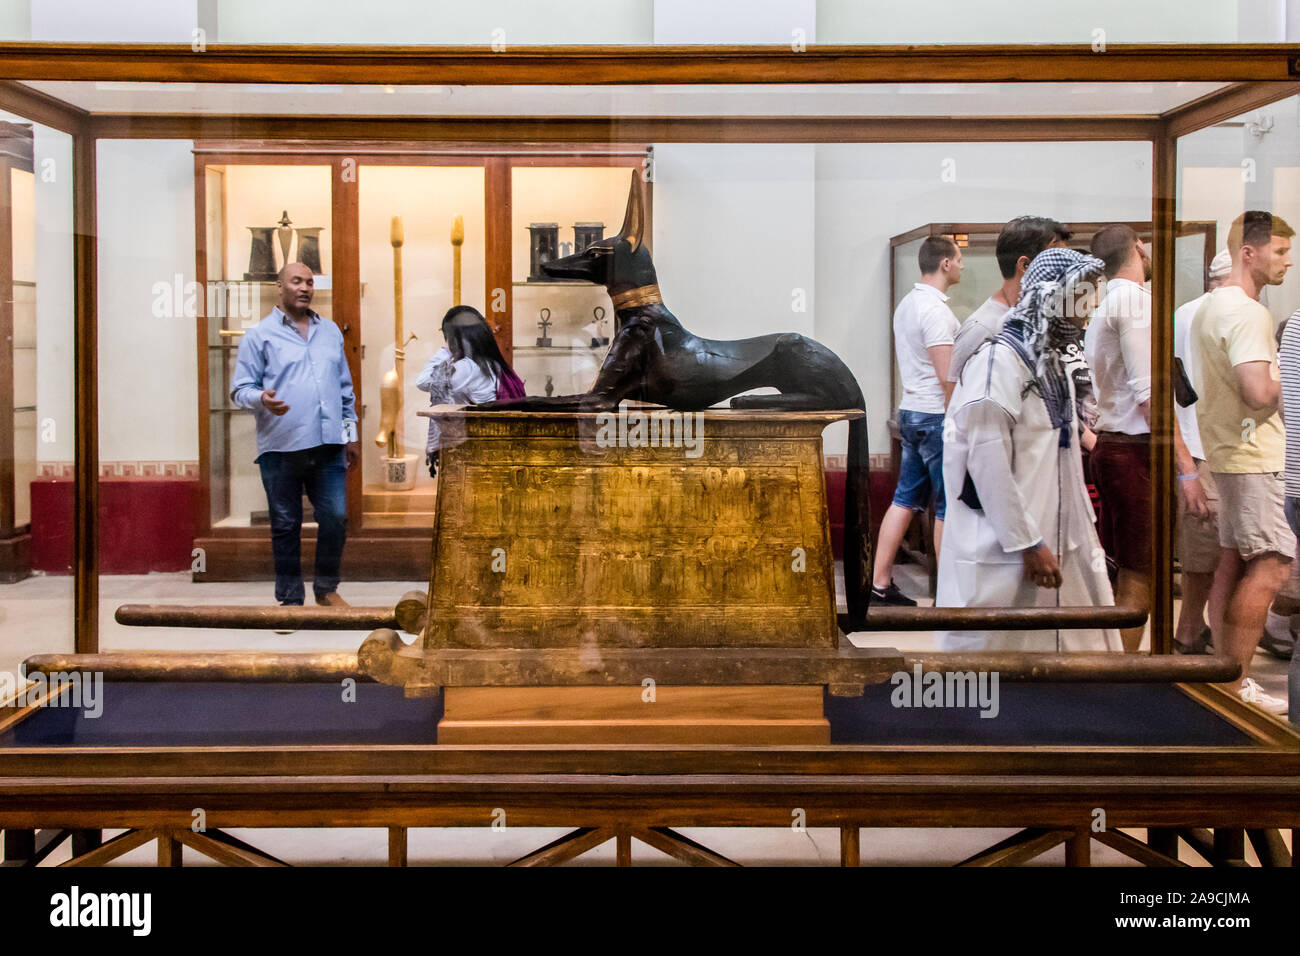 Cairo, Egypt - April 19, 2019: The Egyptian statue of god Anubis from Tutankhamun tomb in the Egyptian Museum, Cairo Stock Photo